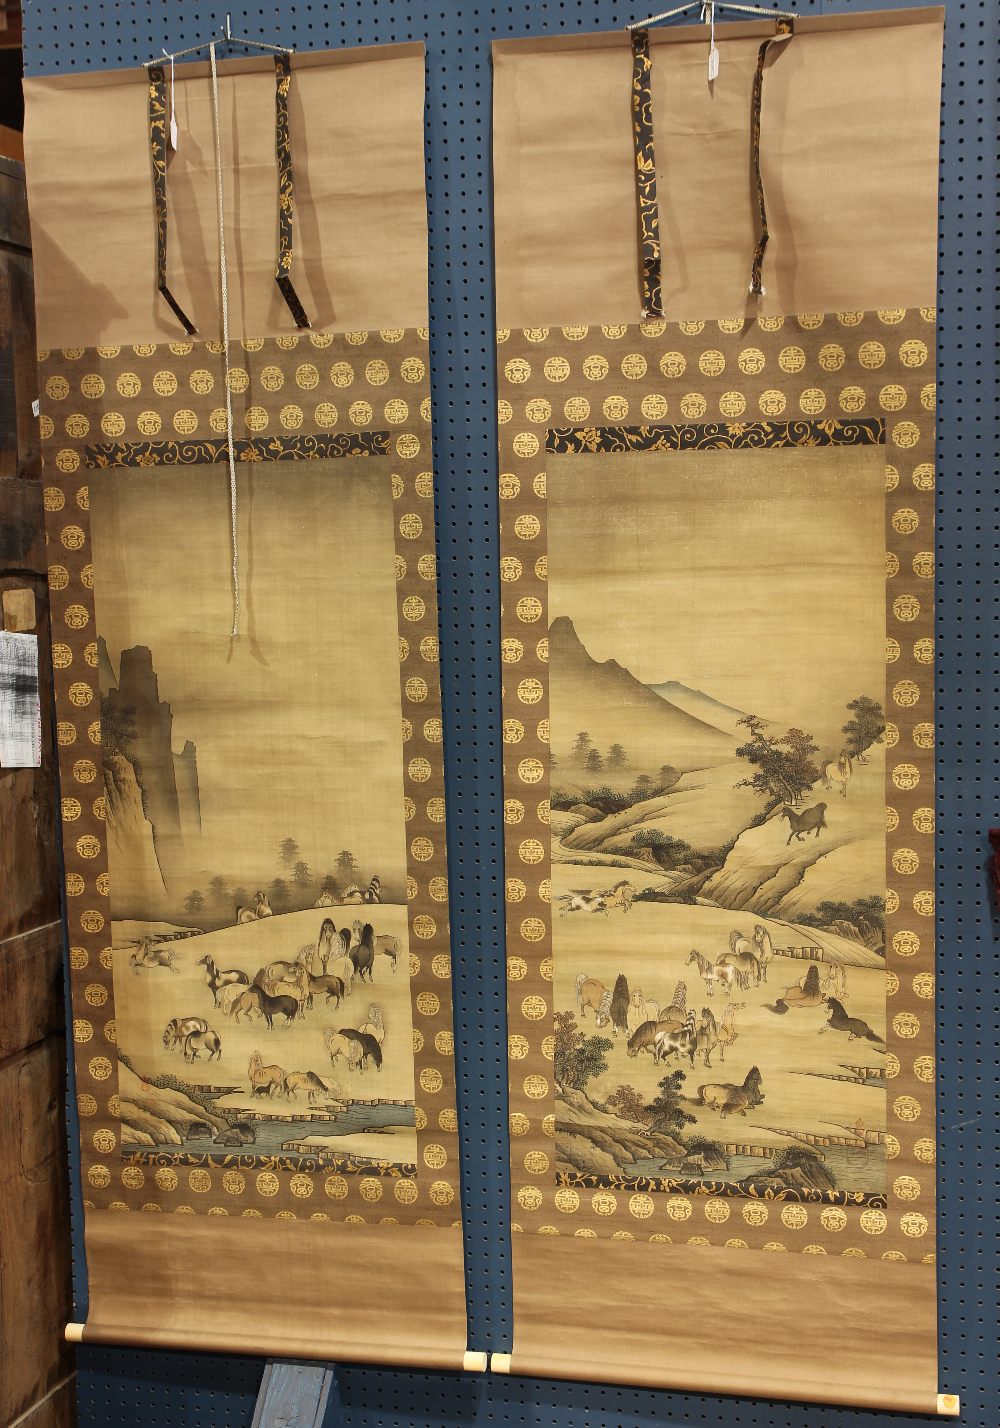 (lot of 2) Unkoku School (Japanese), Horses, ink and color on silk, the pair of scrolls depicting